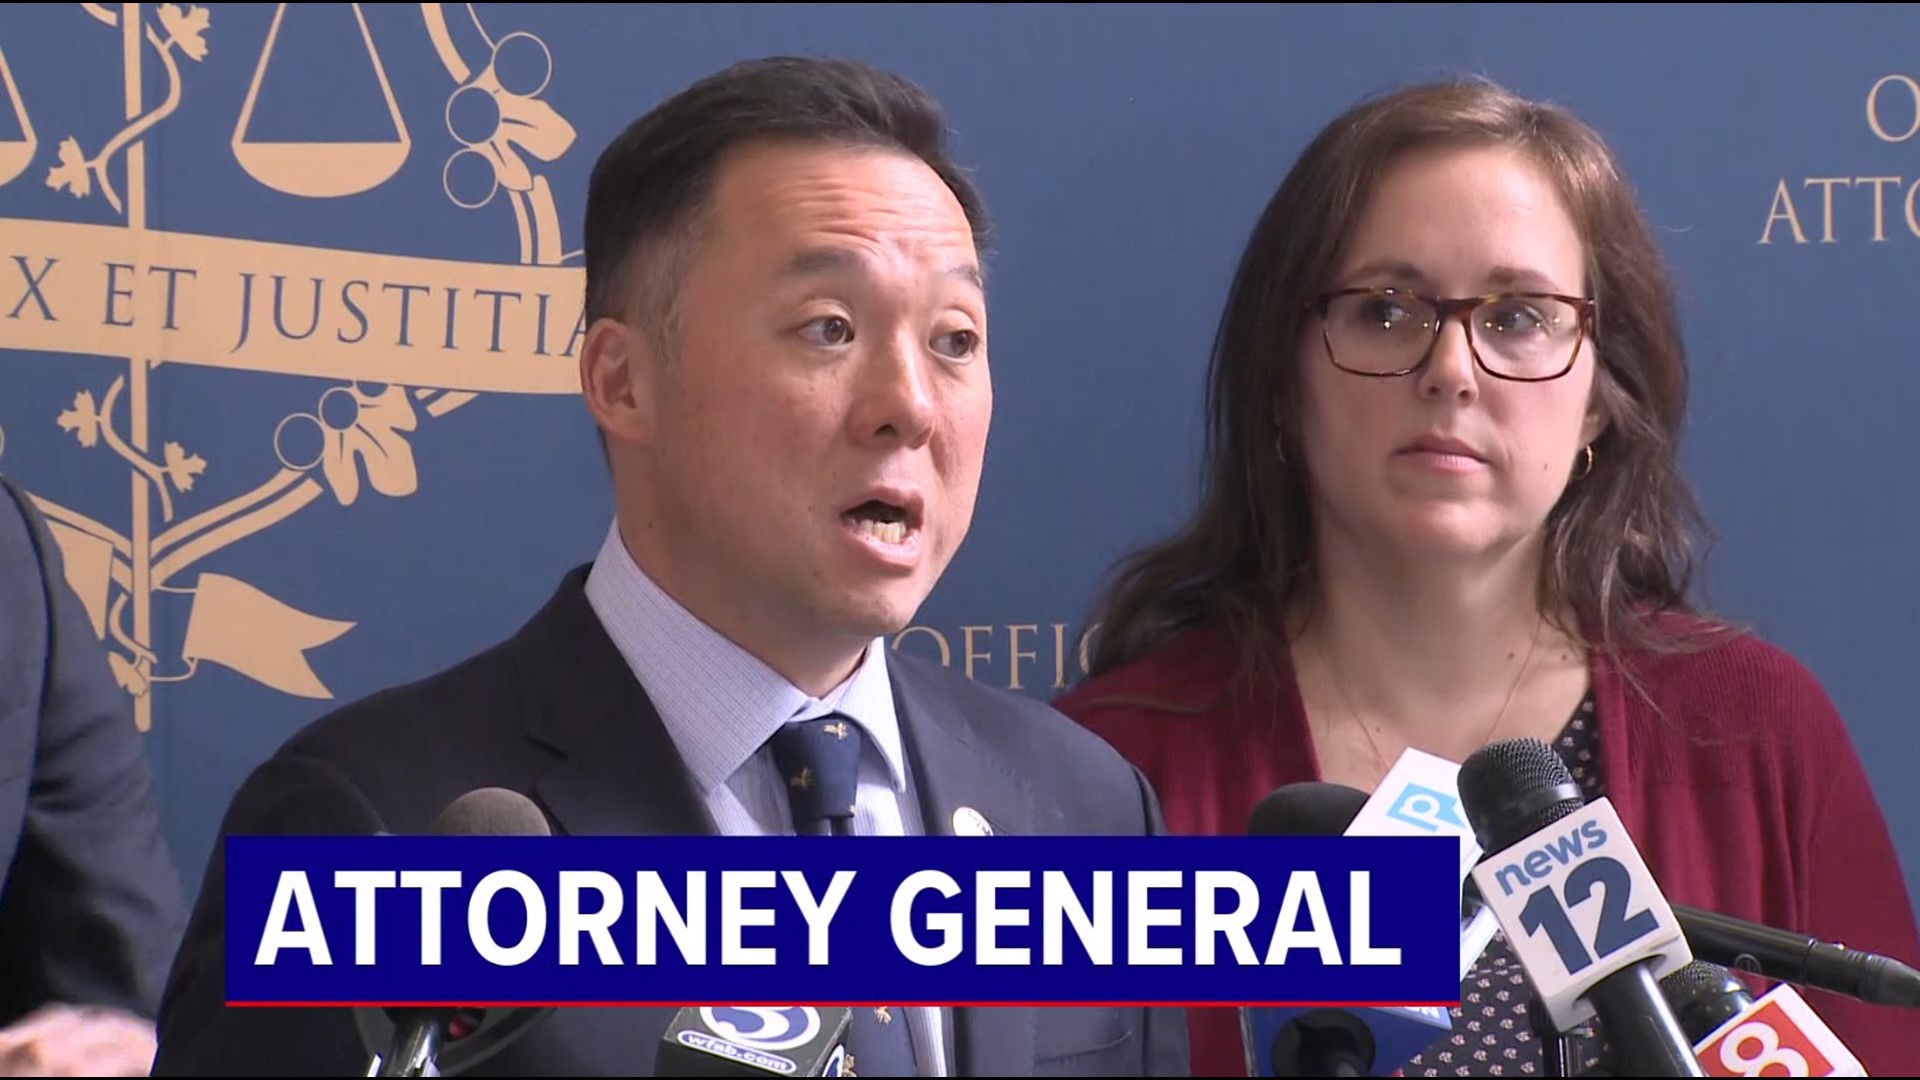 Attorney General William Tong talks about the latest in efforts to protect consumers in the state